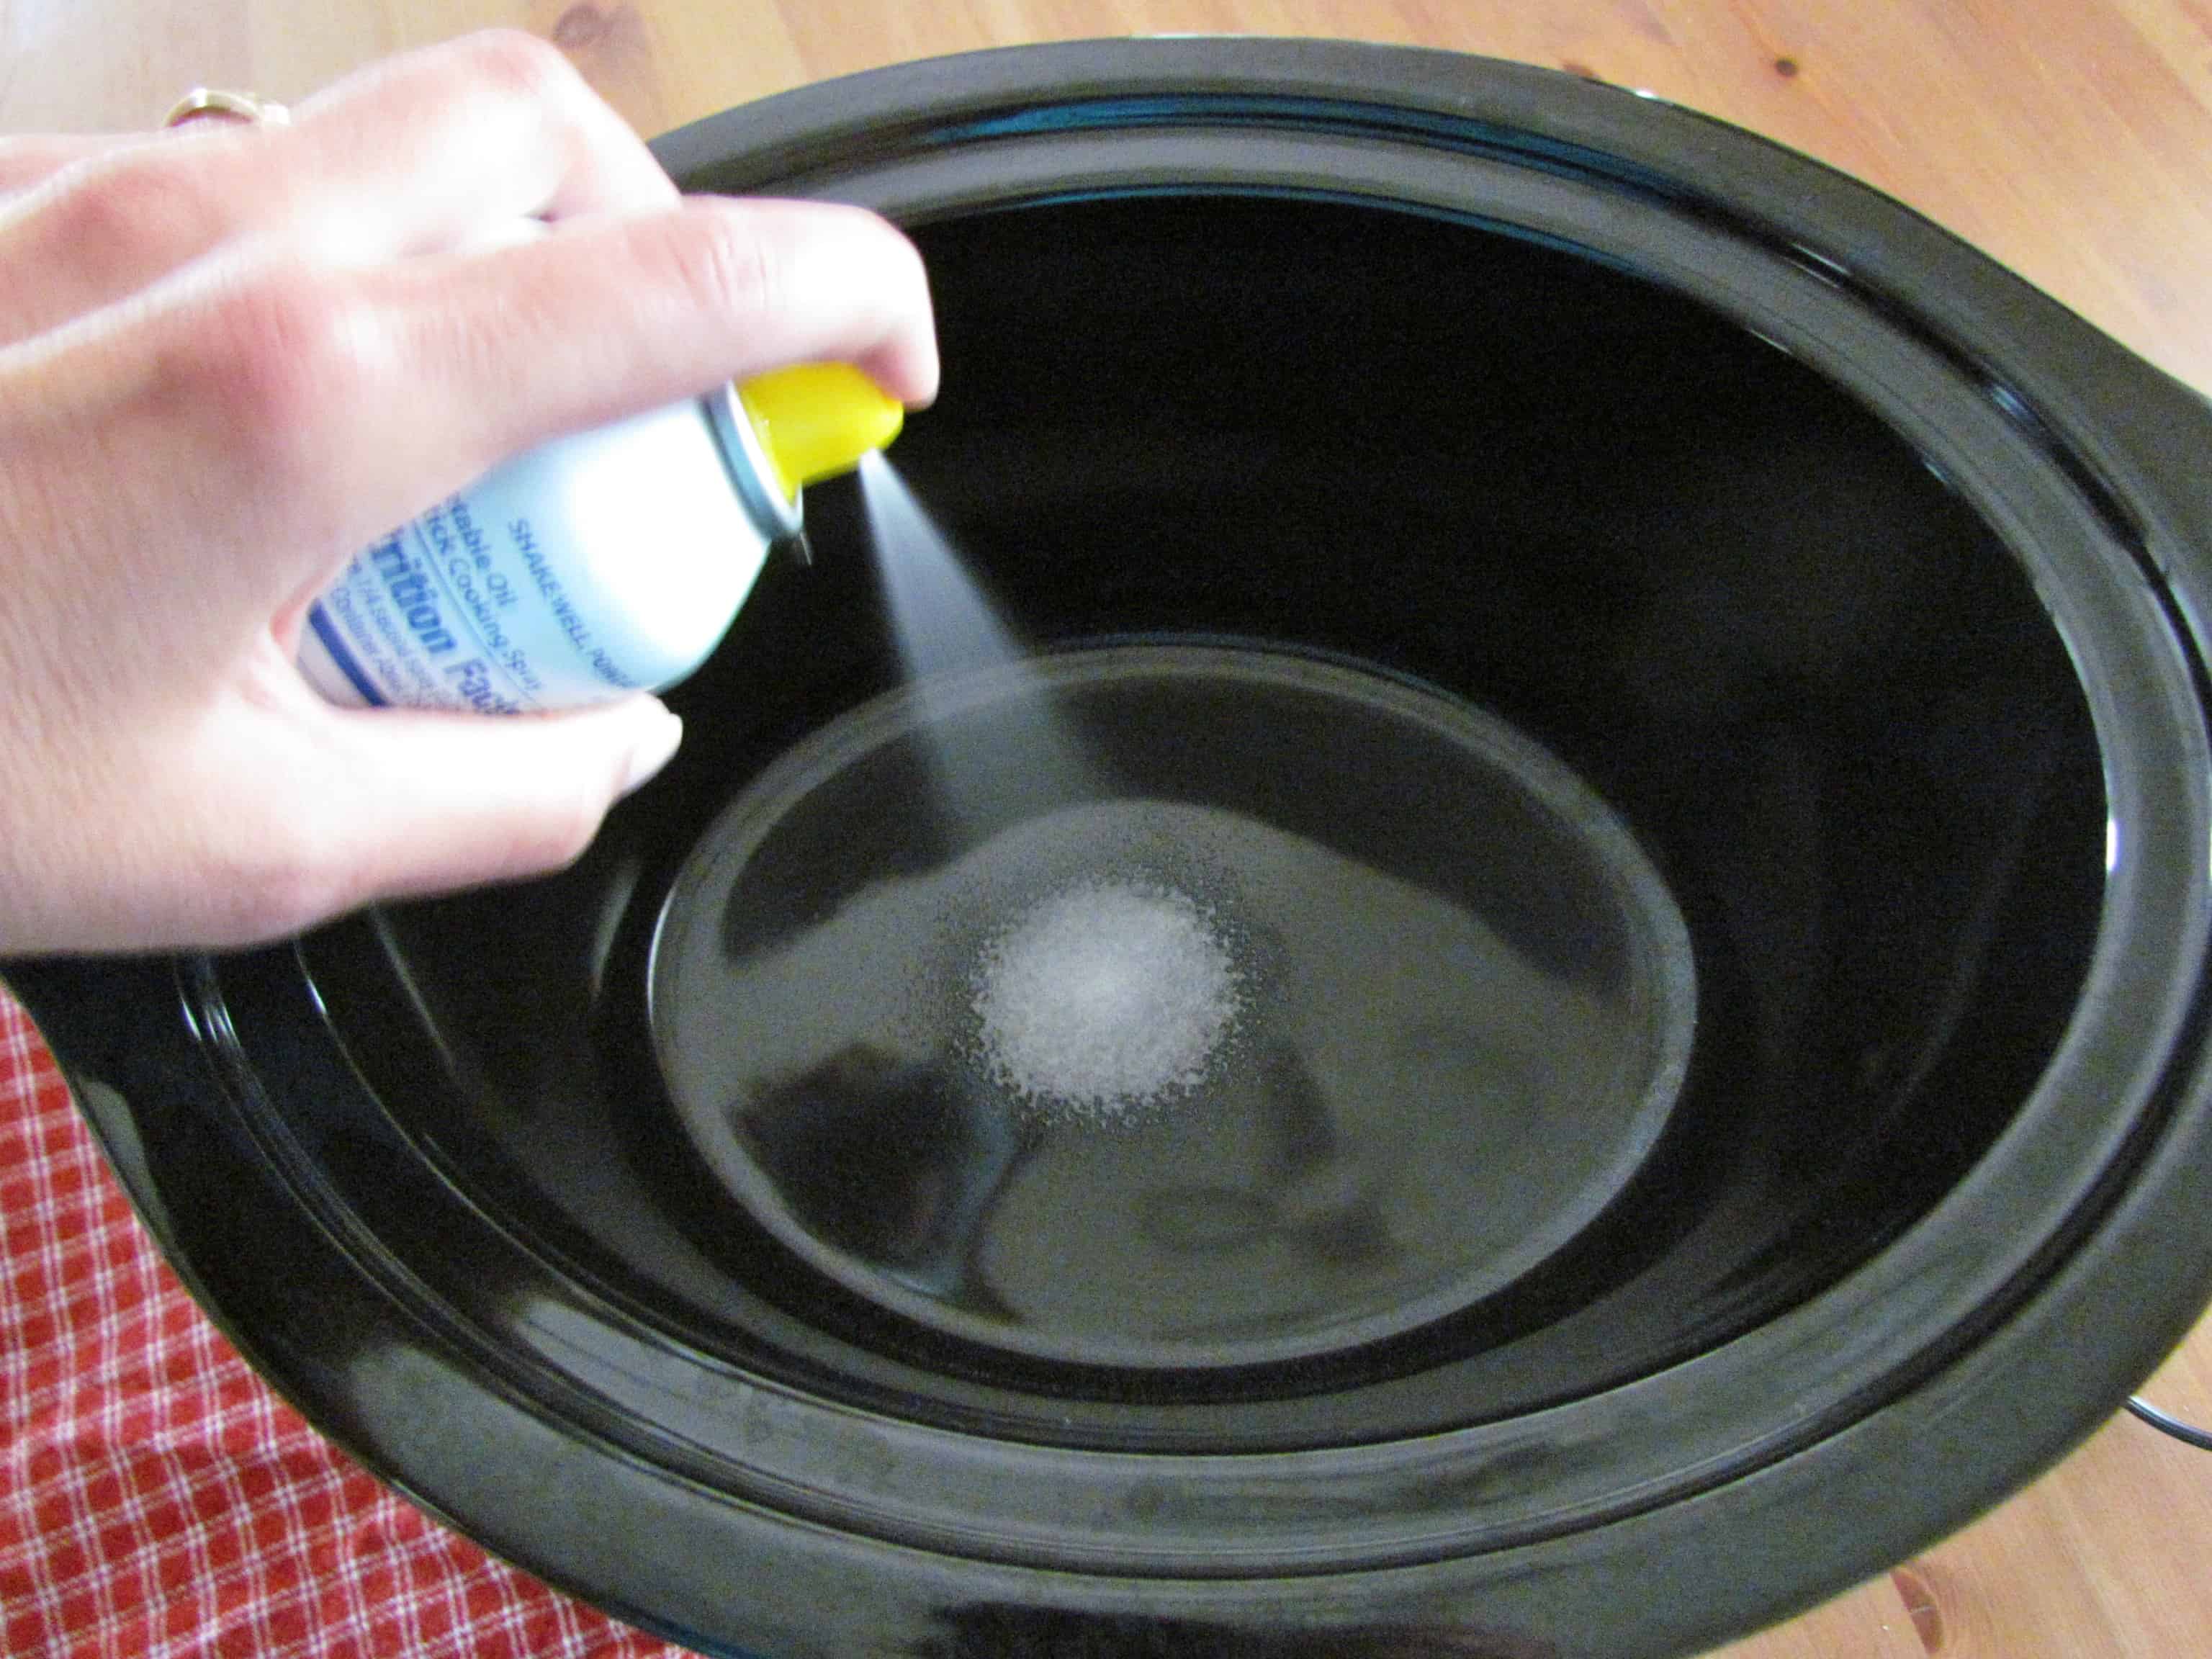 spraying a black oval slow cooker with nonstick cooking spray.